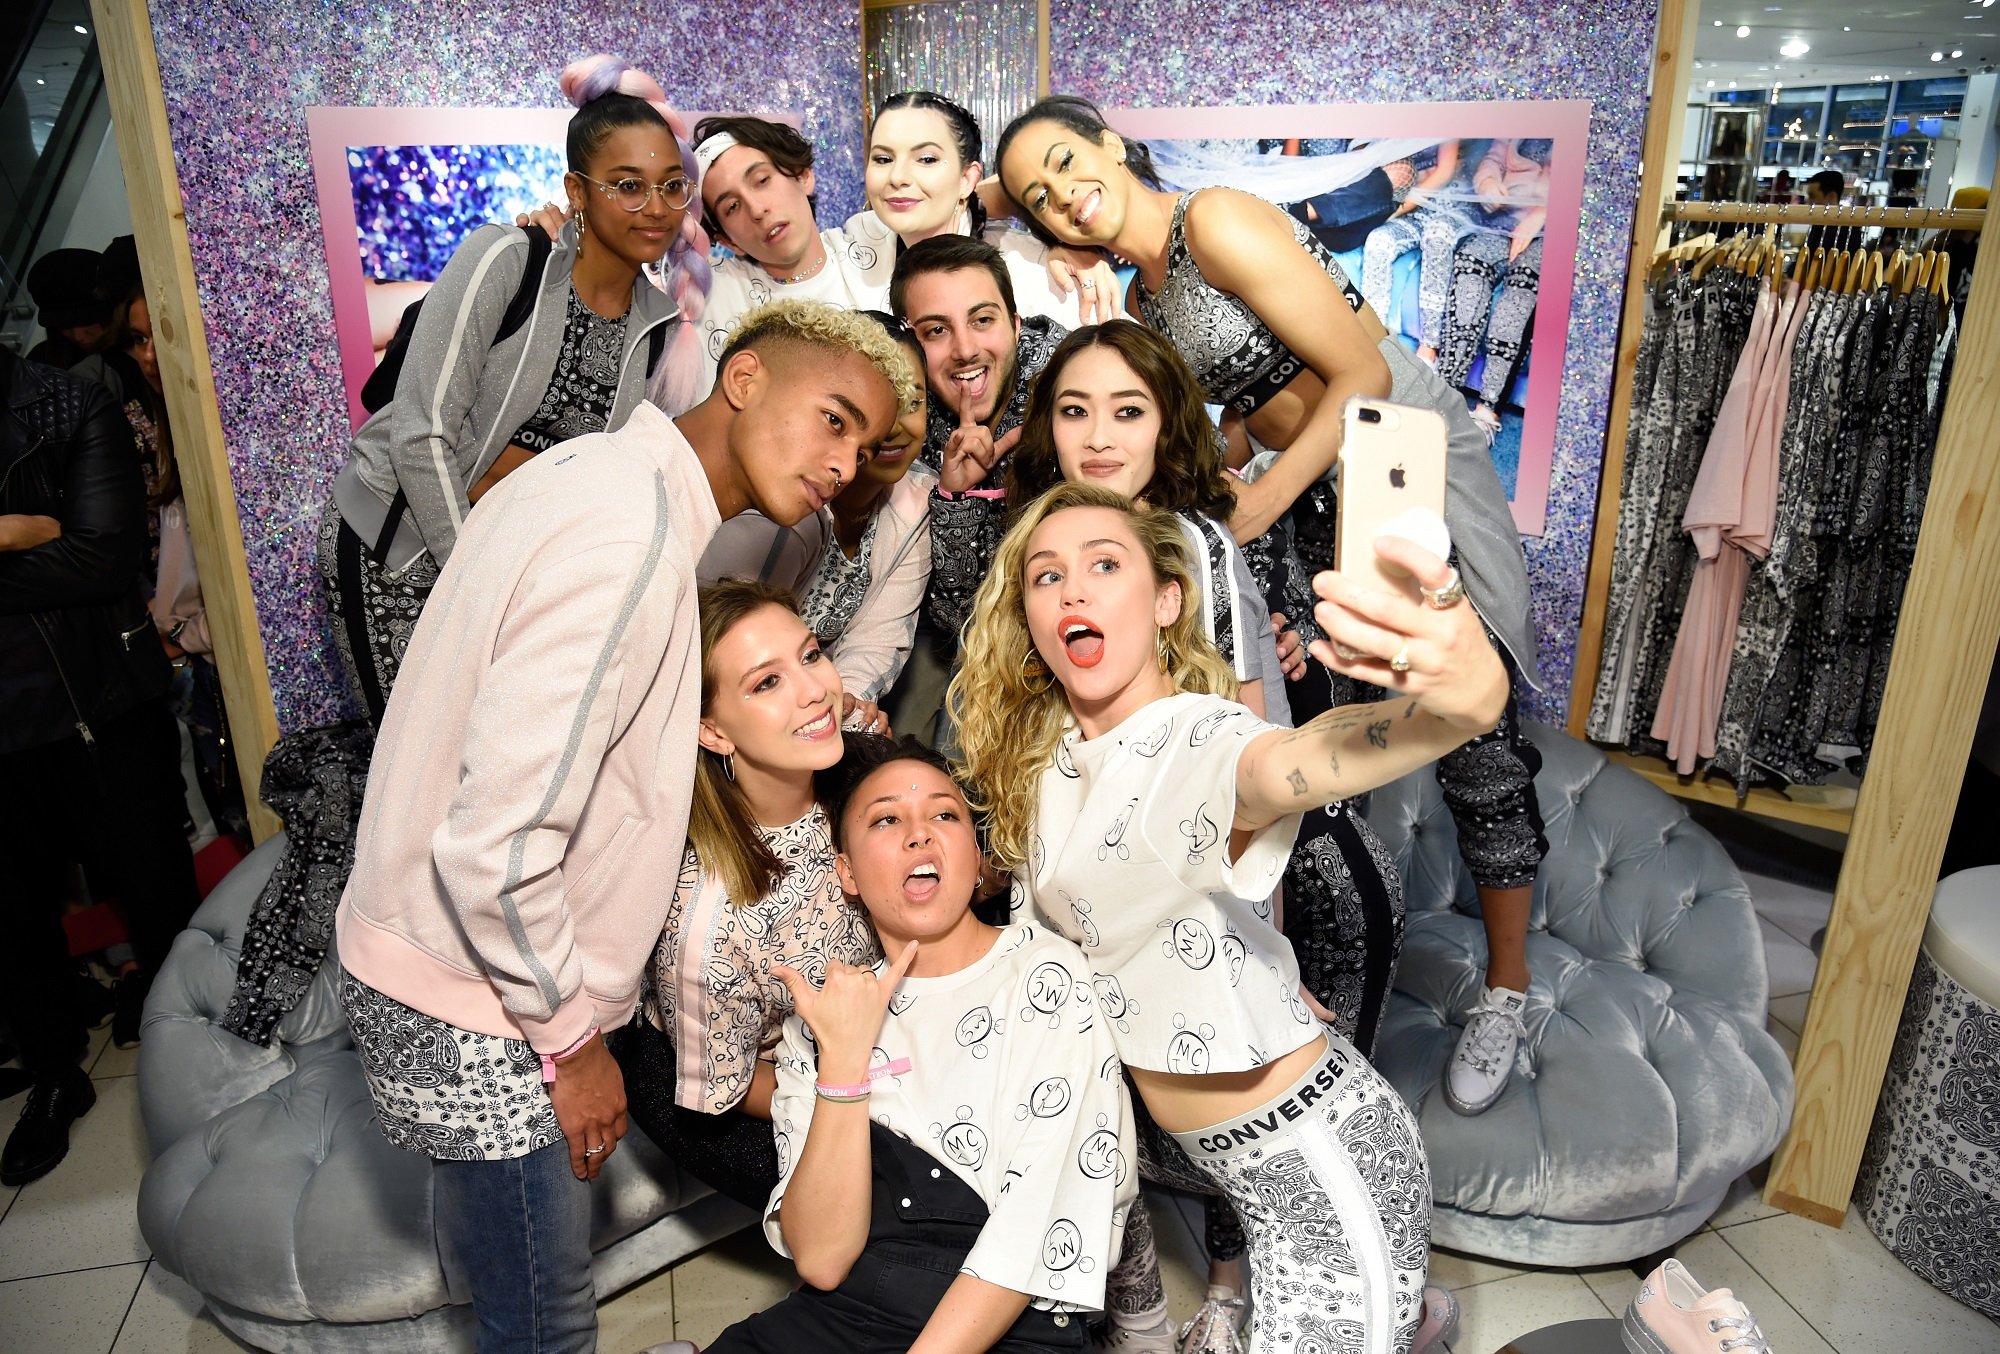 Miley Cyrus Surprises Fans at Nordstrom The Grove to Celebrate Converse X Miley Cyrus Pop-Up Shop at The Grove on May 1, 2018 in Los Angeles, California.